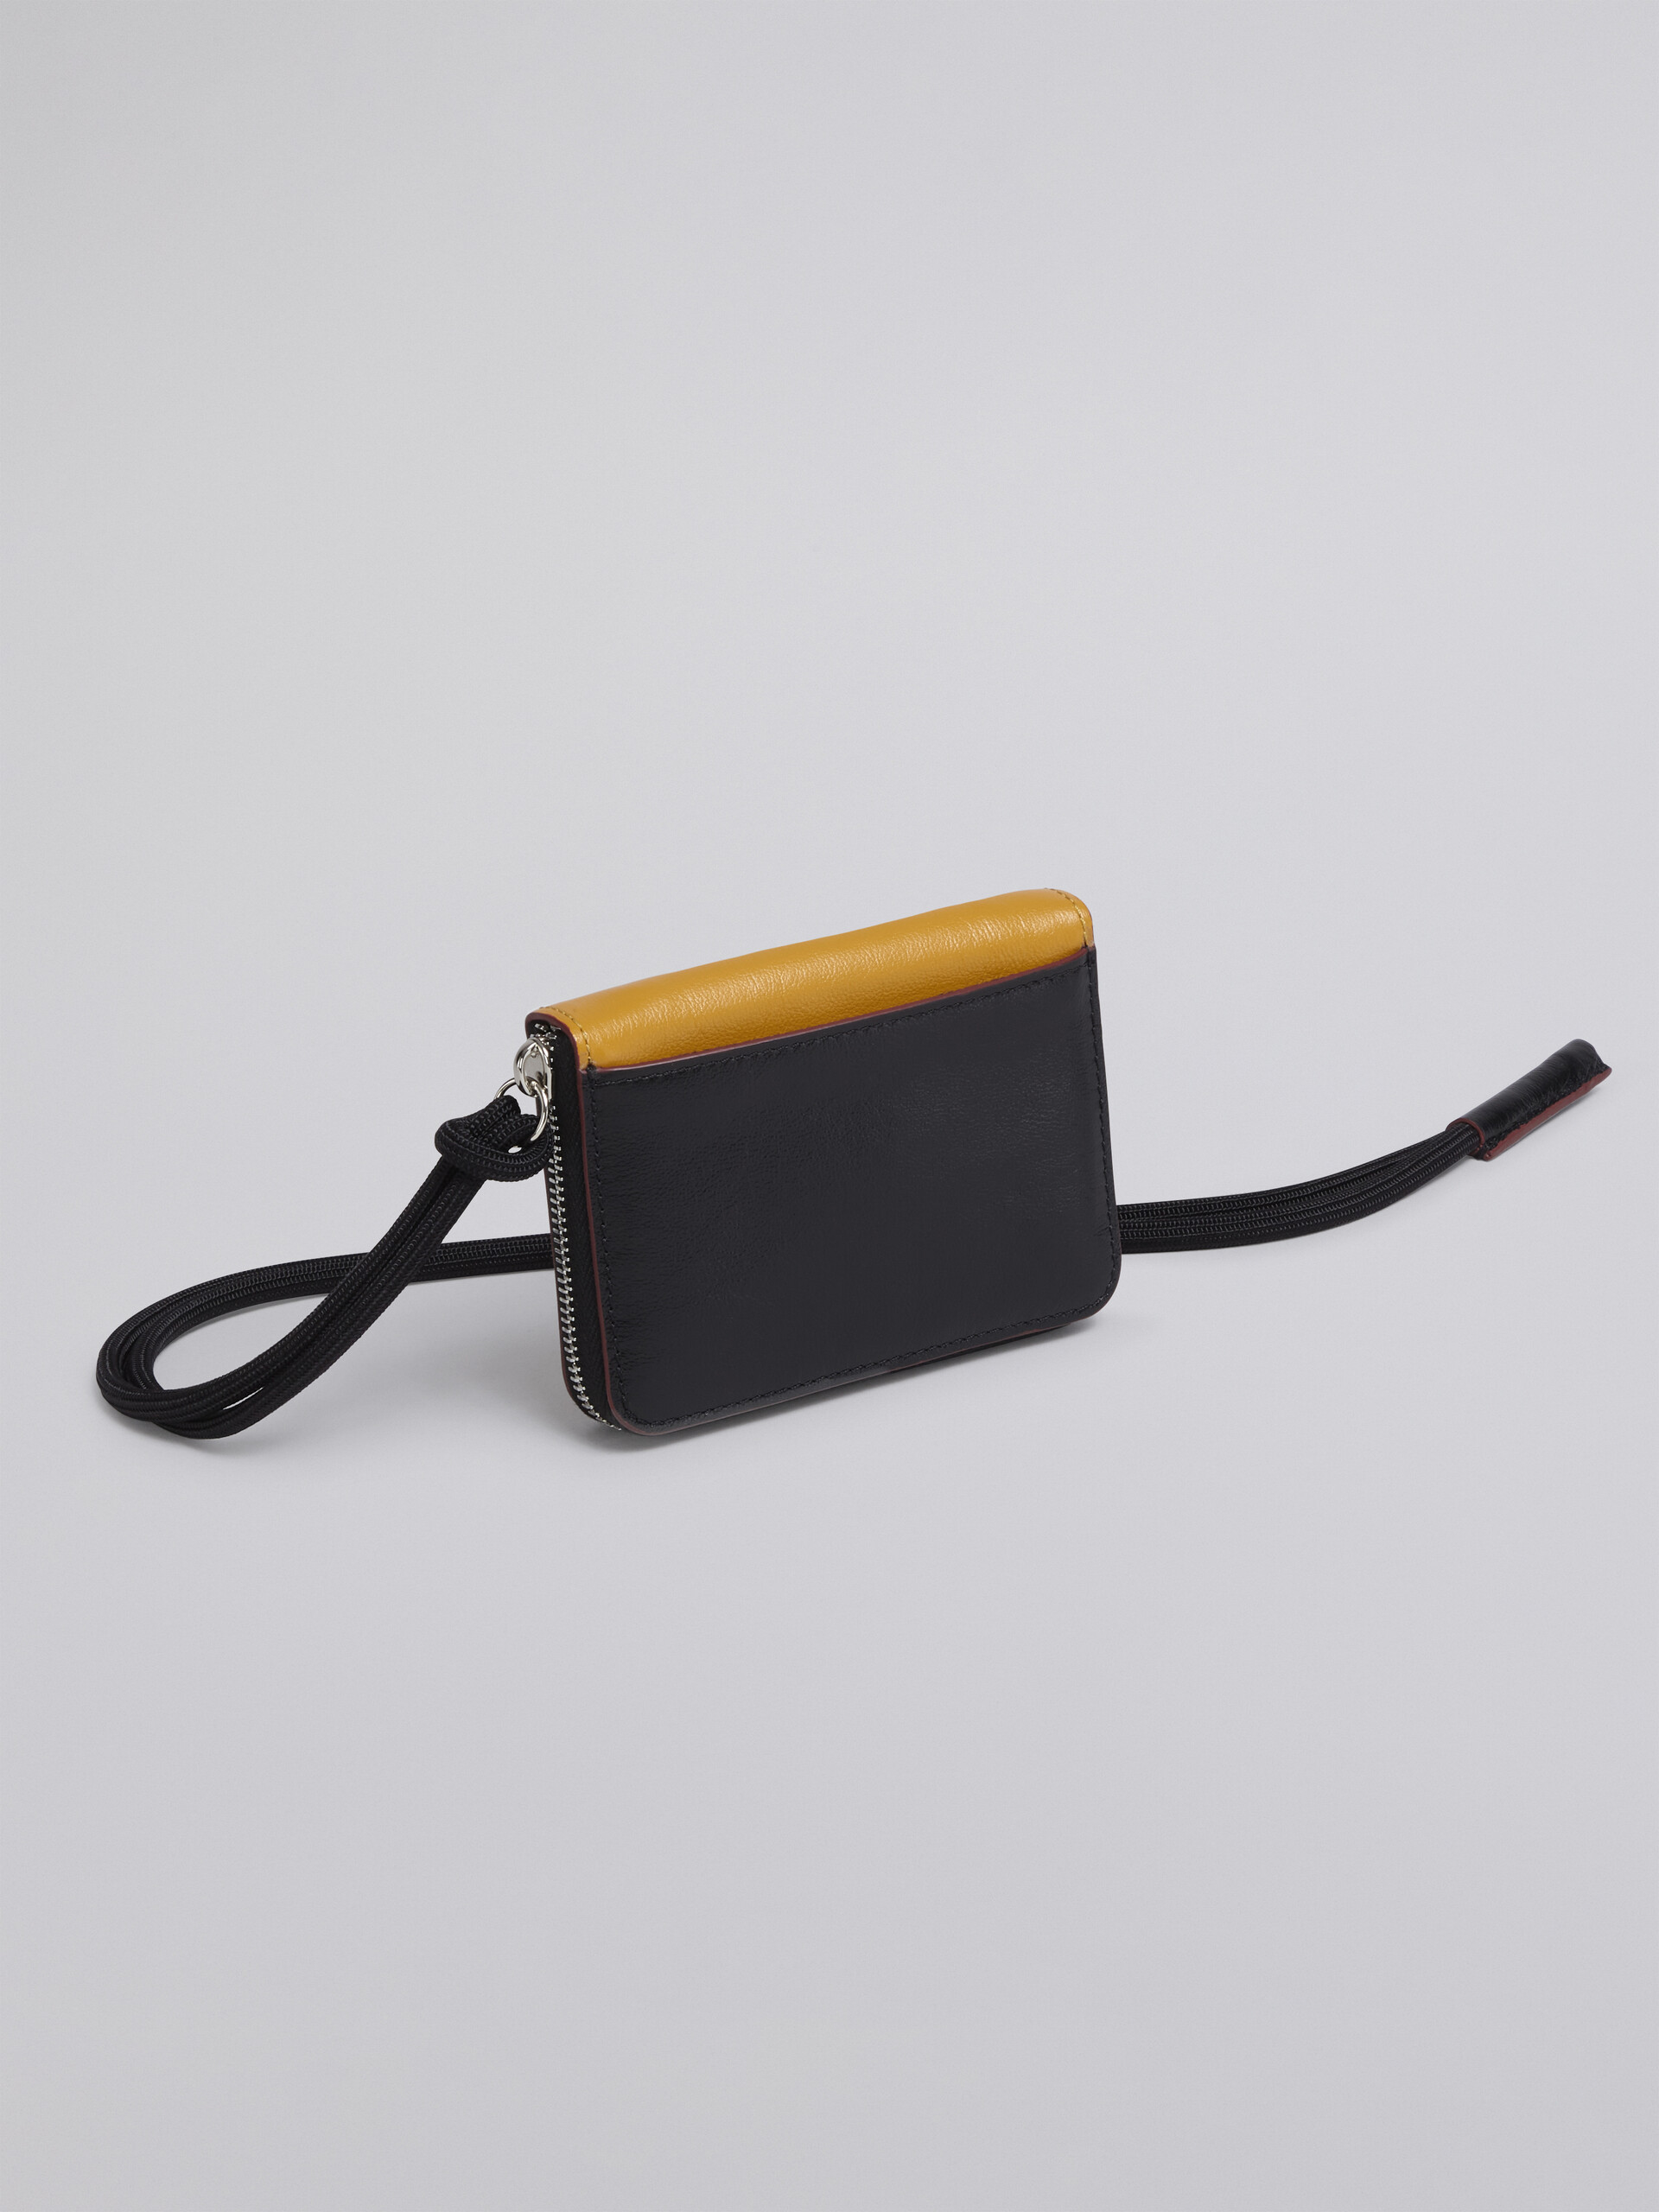 Bi-coloured yellow and black calfskin MUSEO wallet with shoulder strap - Wallets - Image 4